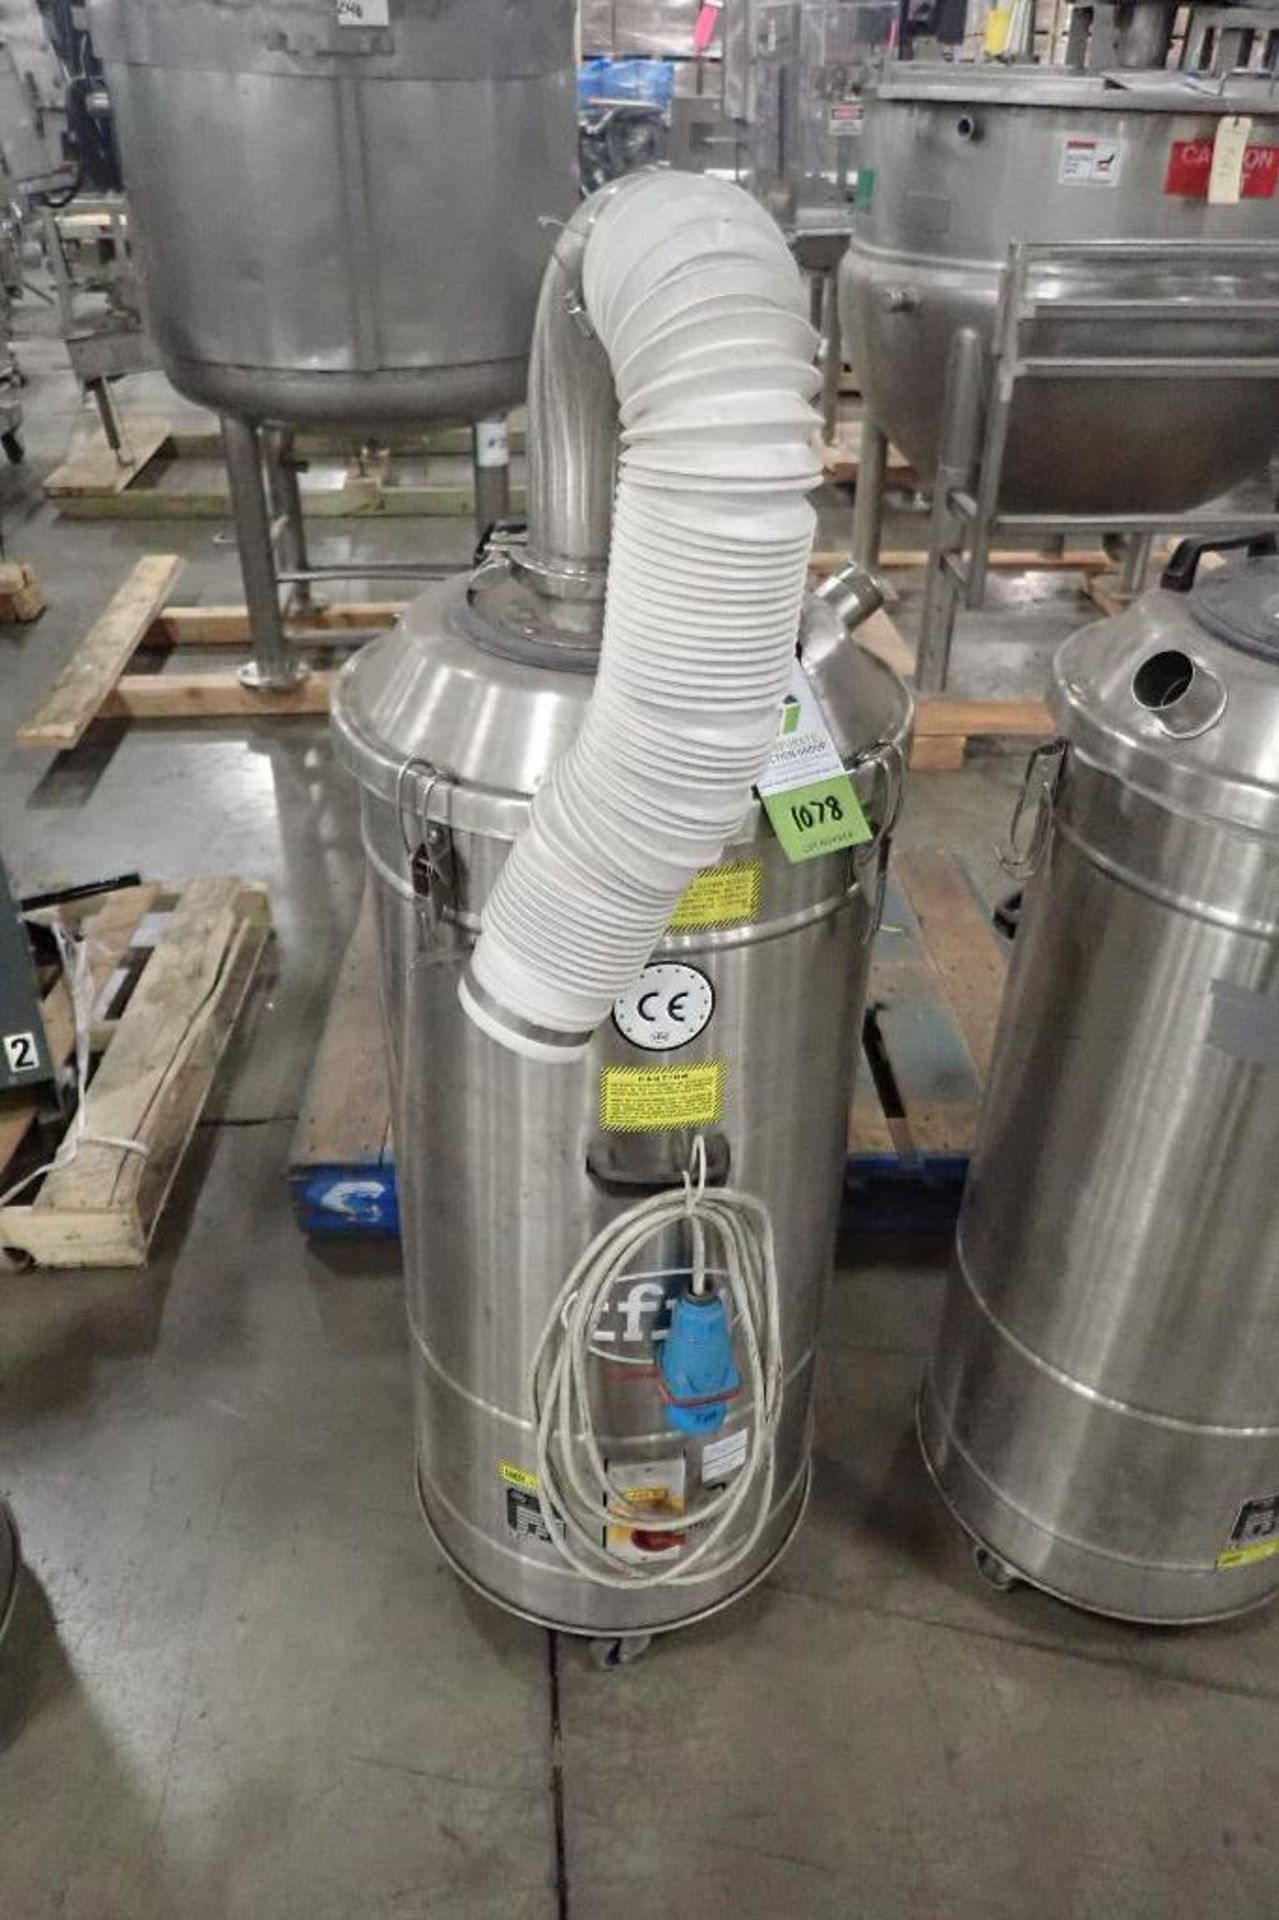 Nilfisk commercial vacuum, Type R154X, SN 02AF268. **Rigging Fee: $25** (Located in 3703 - Eagan, MN